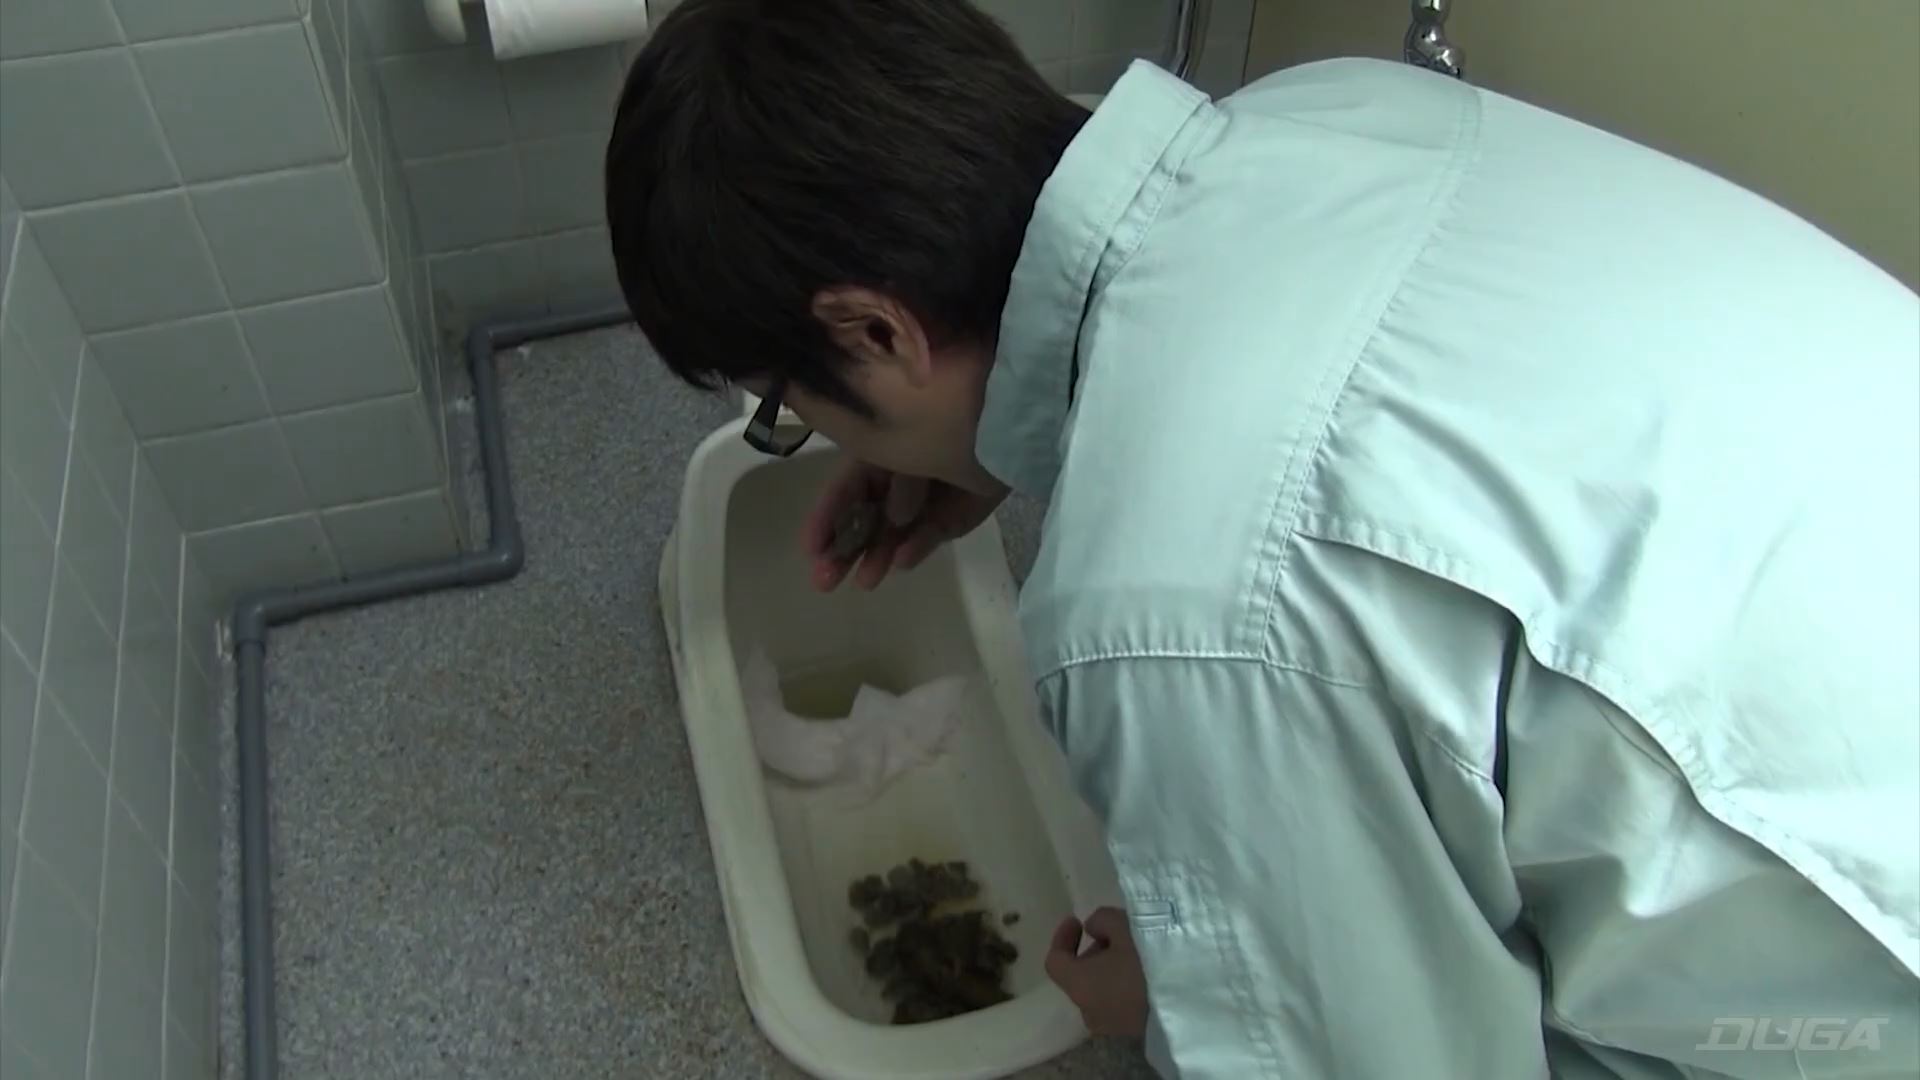 [SCAT FEMDOM MEDLEY] The Japanese girl pooping in the toilet, and the man tries the taste of her poop [FULL HD][1080p][MP4]